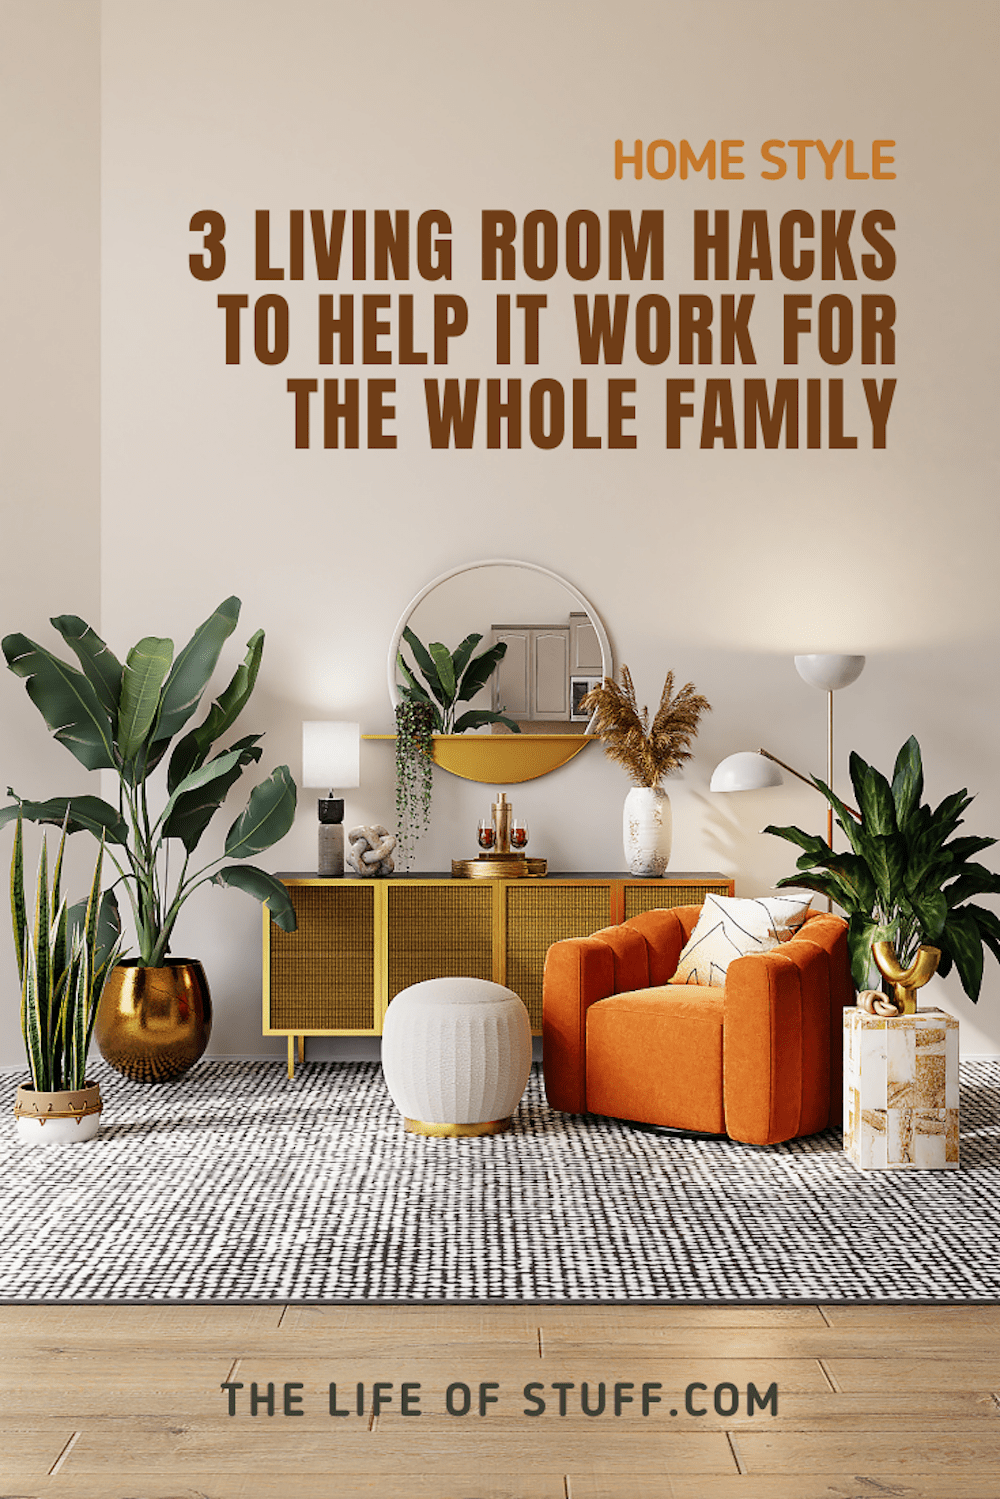 3 Living Room Hacks to Help it Work for the Whole Family - The Life of Stuff